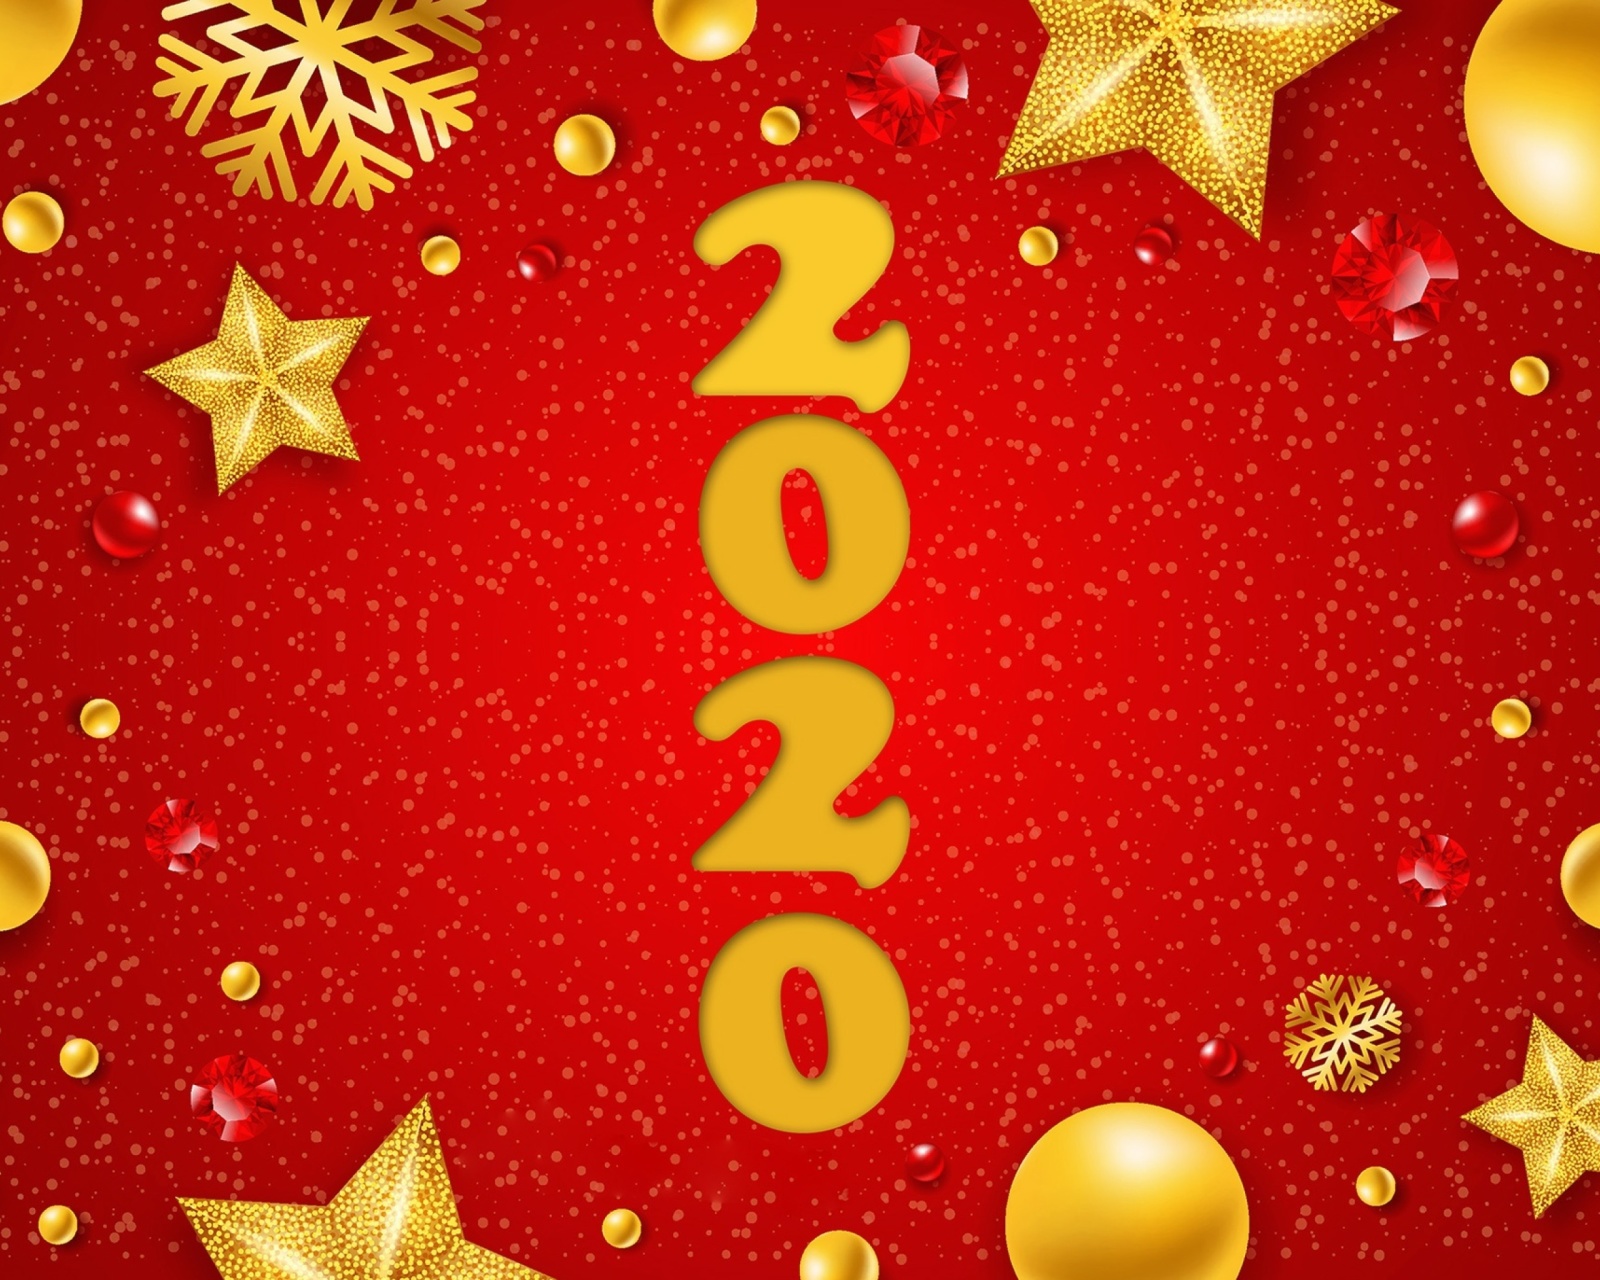 Happy New Year 2020 Messages screenshot #1 1600x1280